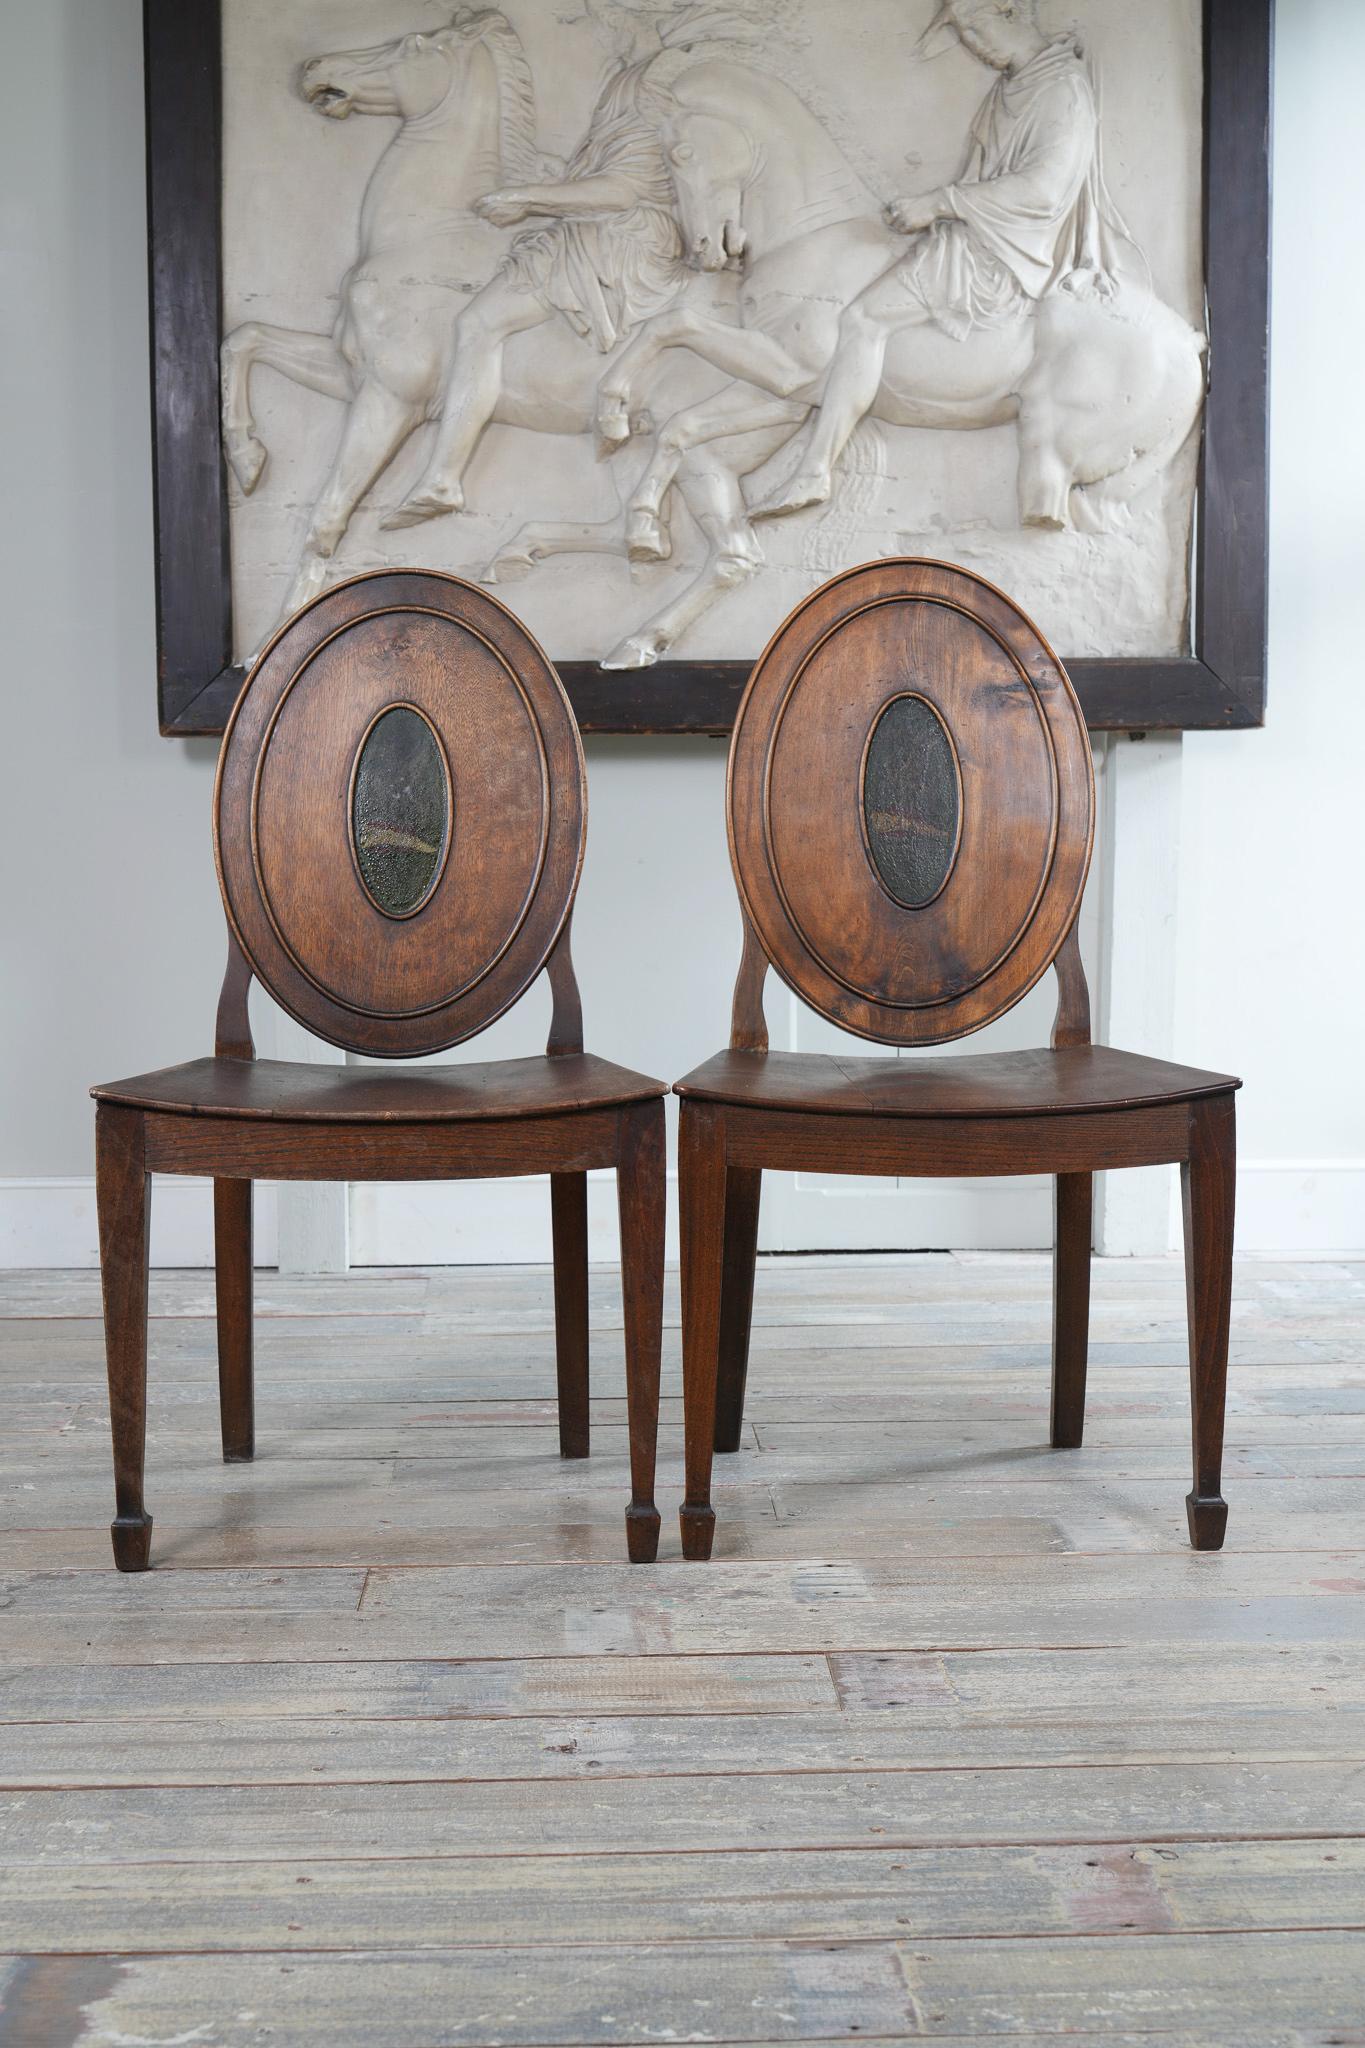  A pair of ash and elm side chairs in the manner of Mayhew & Ince.

The oval back centred by a crest, details below, above a shaped seat and square tapering legs with foot blocks, swept rear legs. The crest as depicted upon this Pair of George III